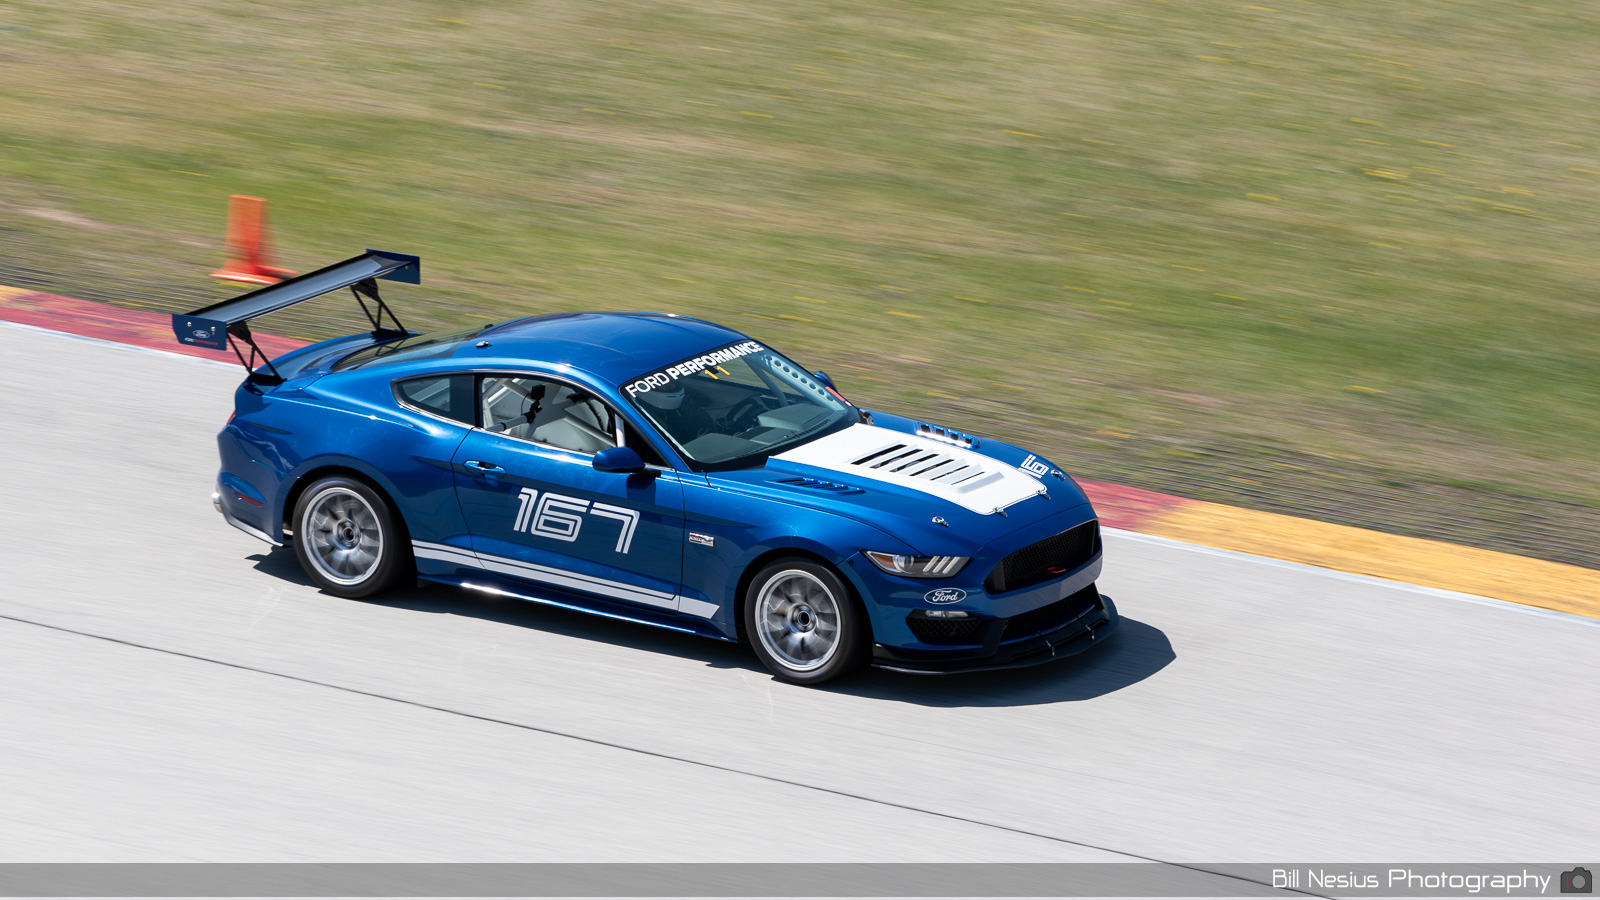 Racing Season Favorites from Blackhawk Farms and Road America Vintage events in 2020.